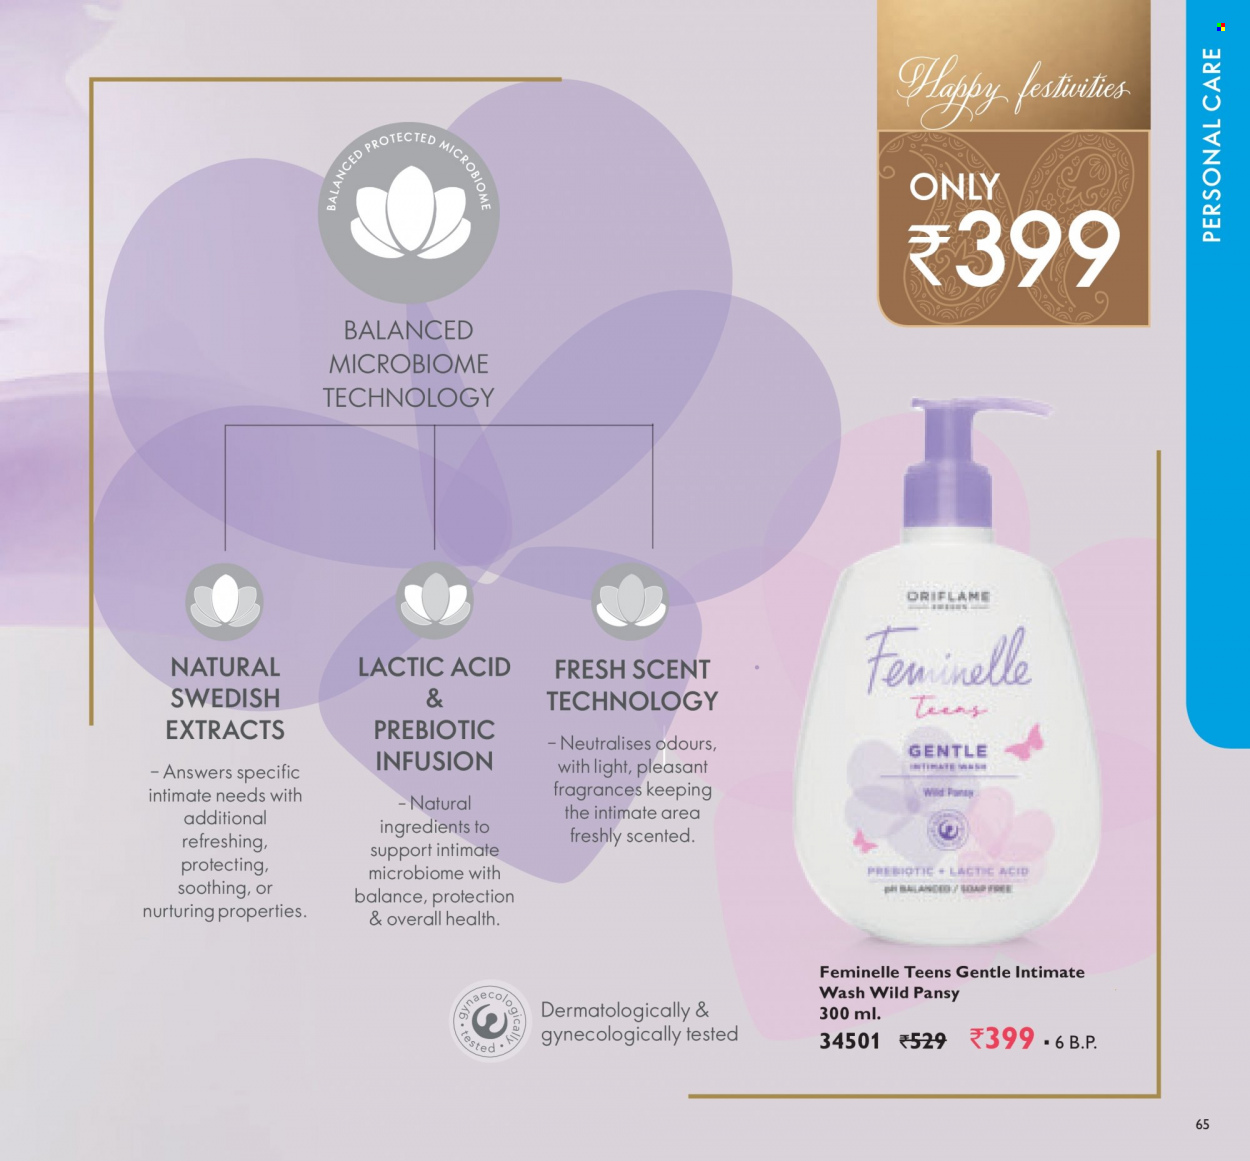 Oriflame offer - 01.10.2021 - 31.10.2021